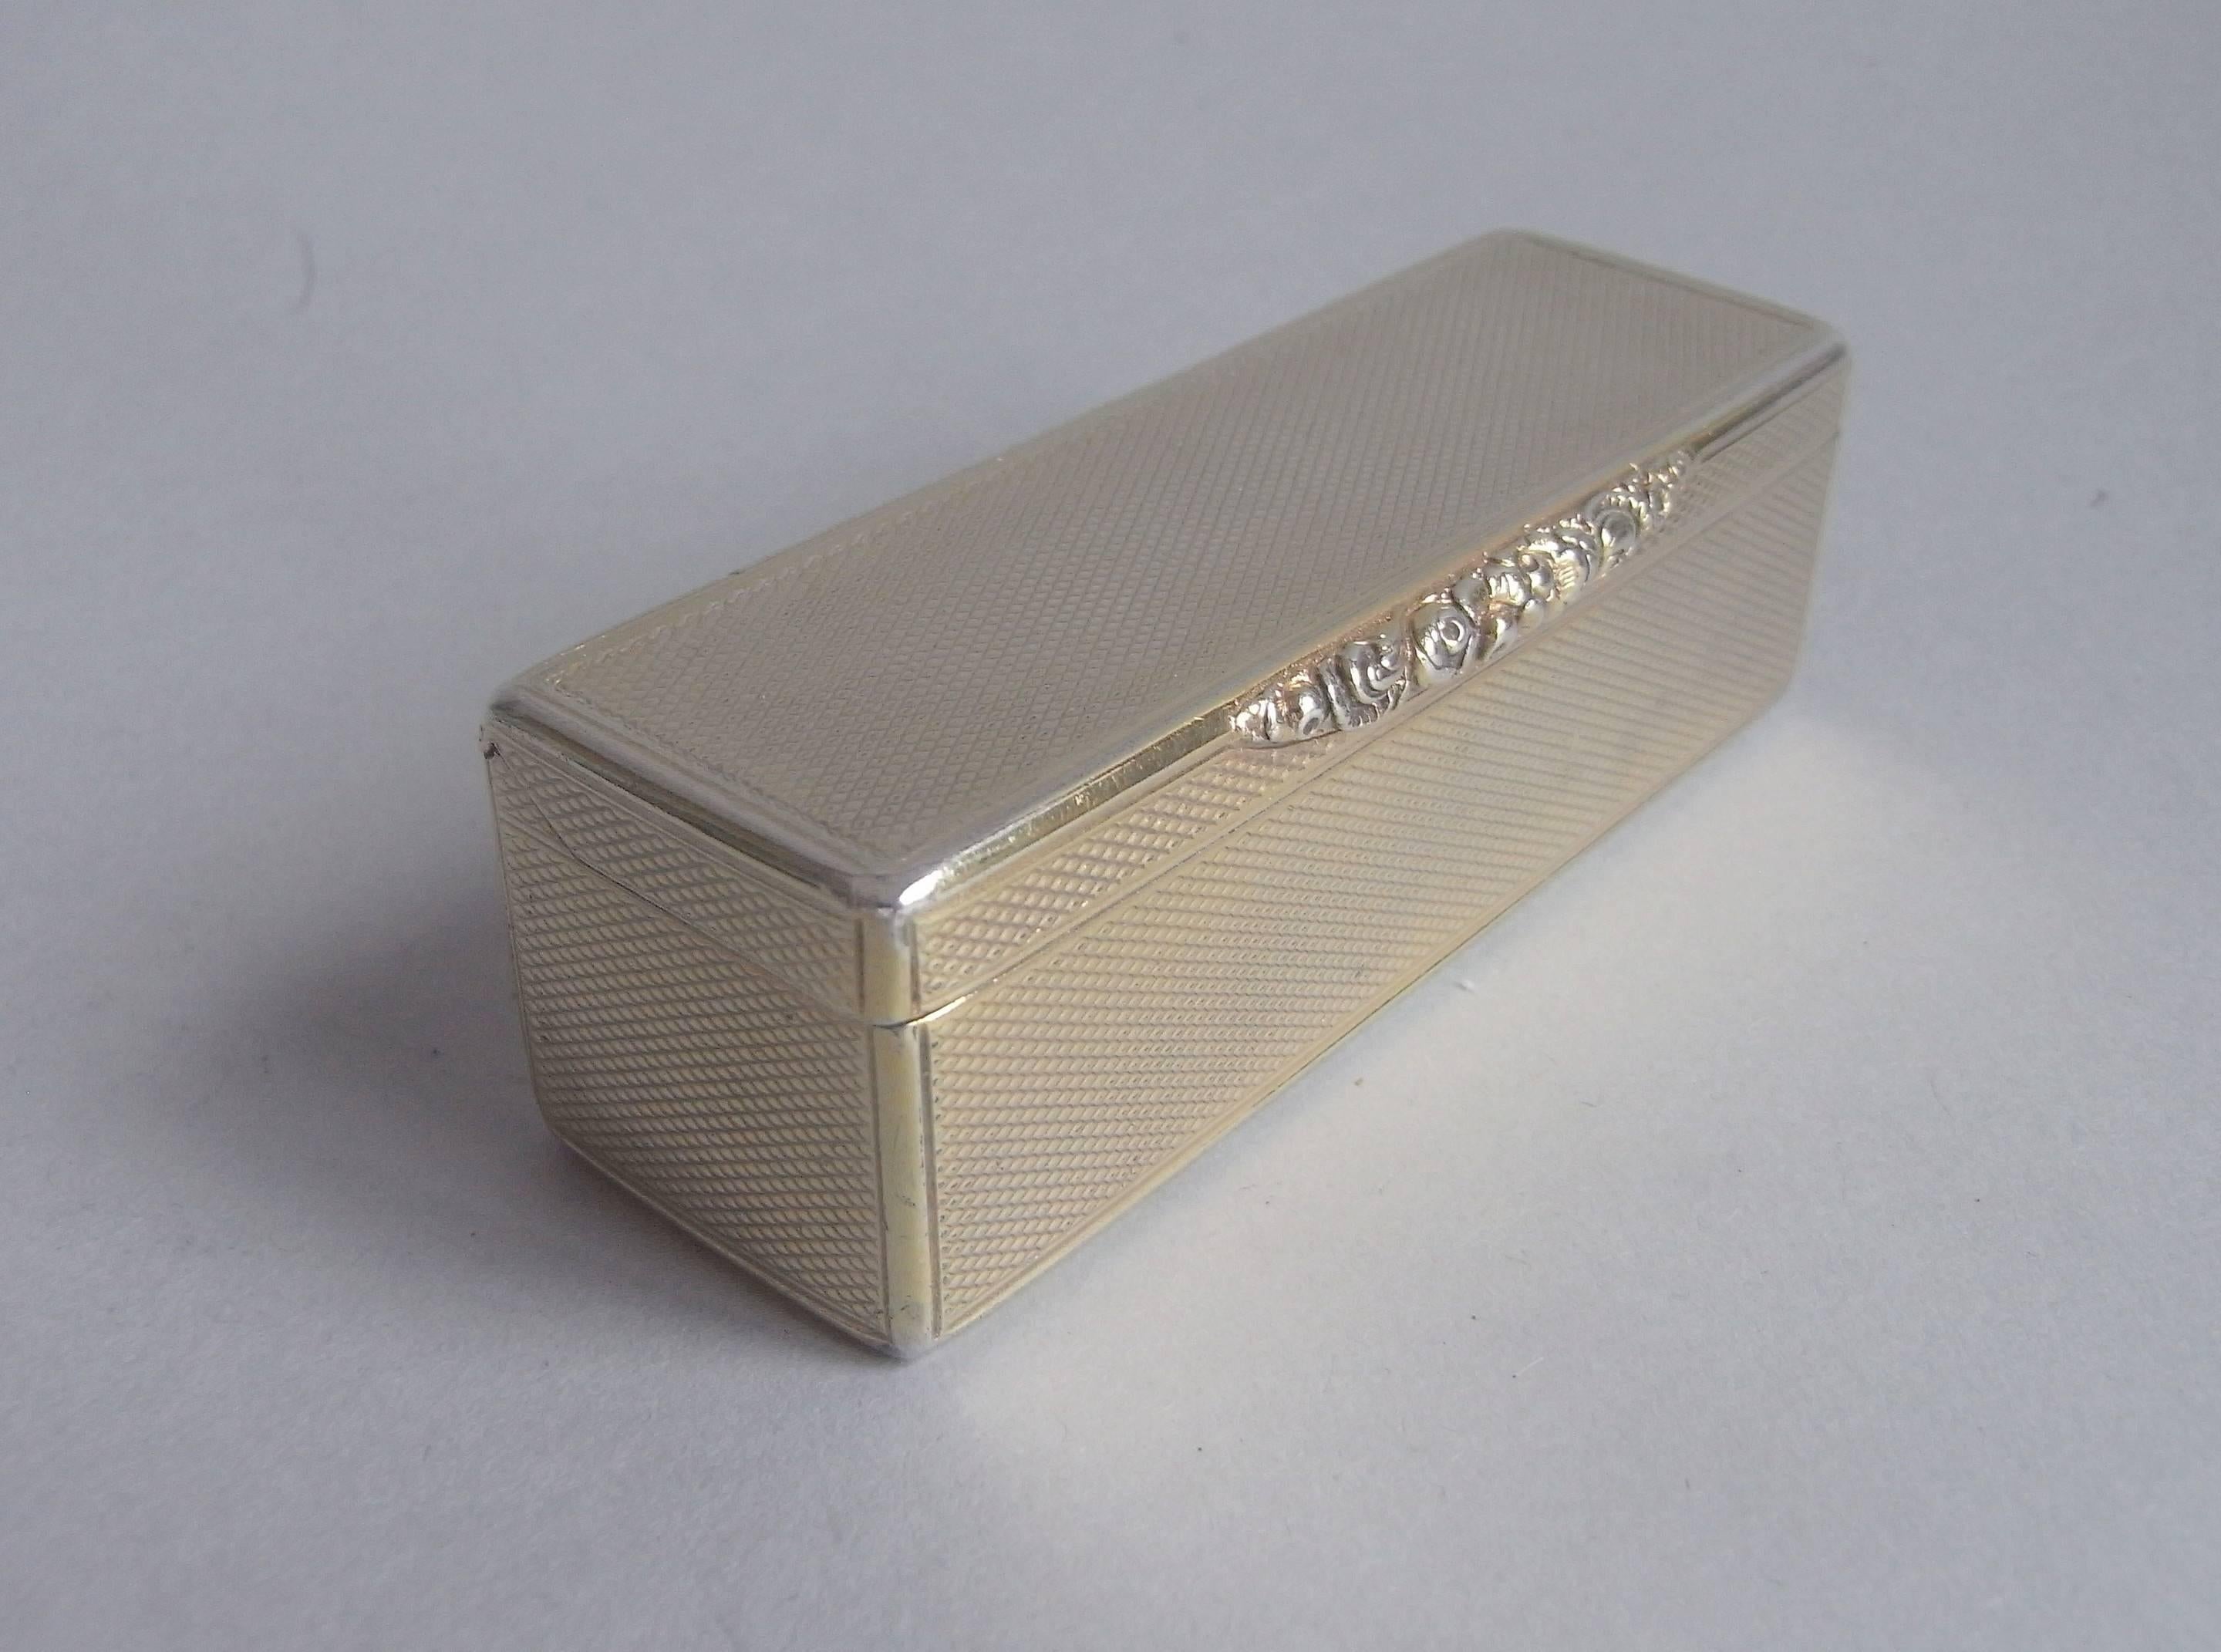 This very unusual pocket snuff box is of a deep narrow rectangular form, with slightly curved top. All the sides are crisply engraved with engine turning and have a plain outer border. This piece is in excellent condition and also has a cast